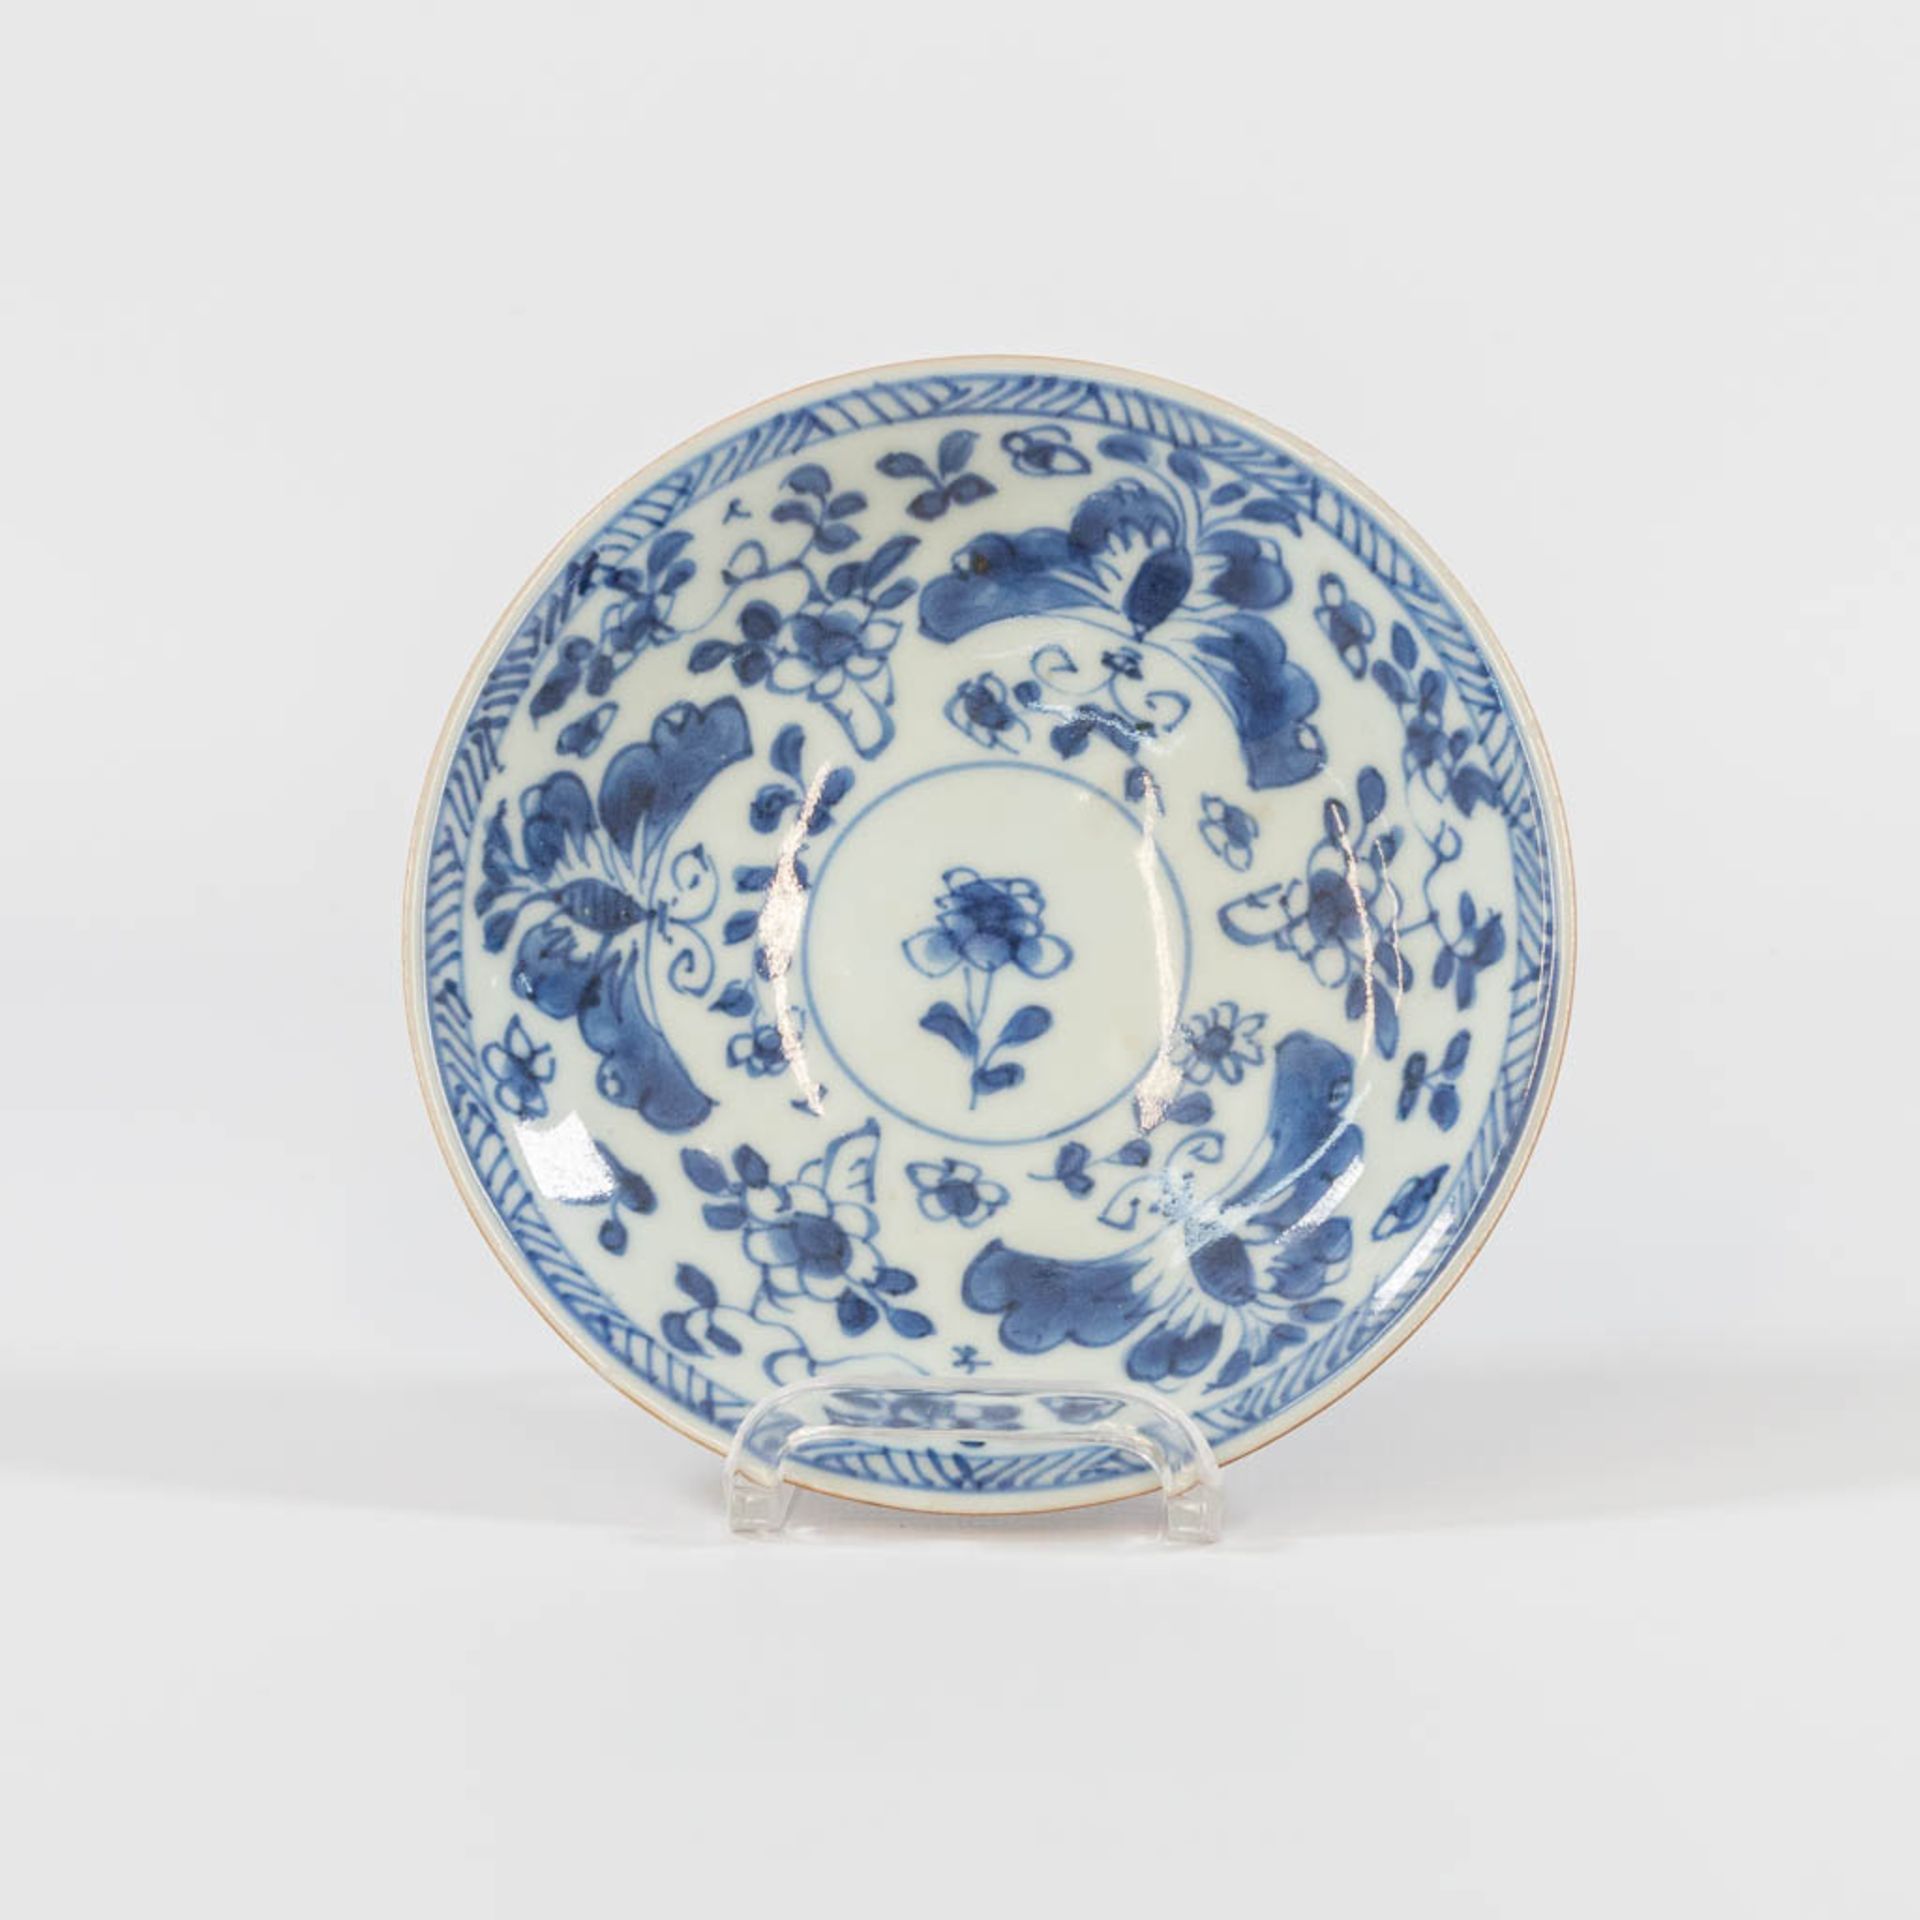 A collection of 12 Capucine Chinese porcelain items, consisting of 5 plates and 7 cups. - Image 26 of 26